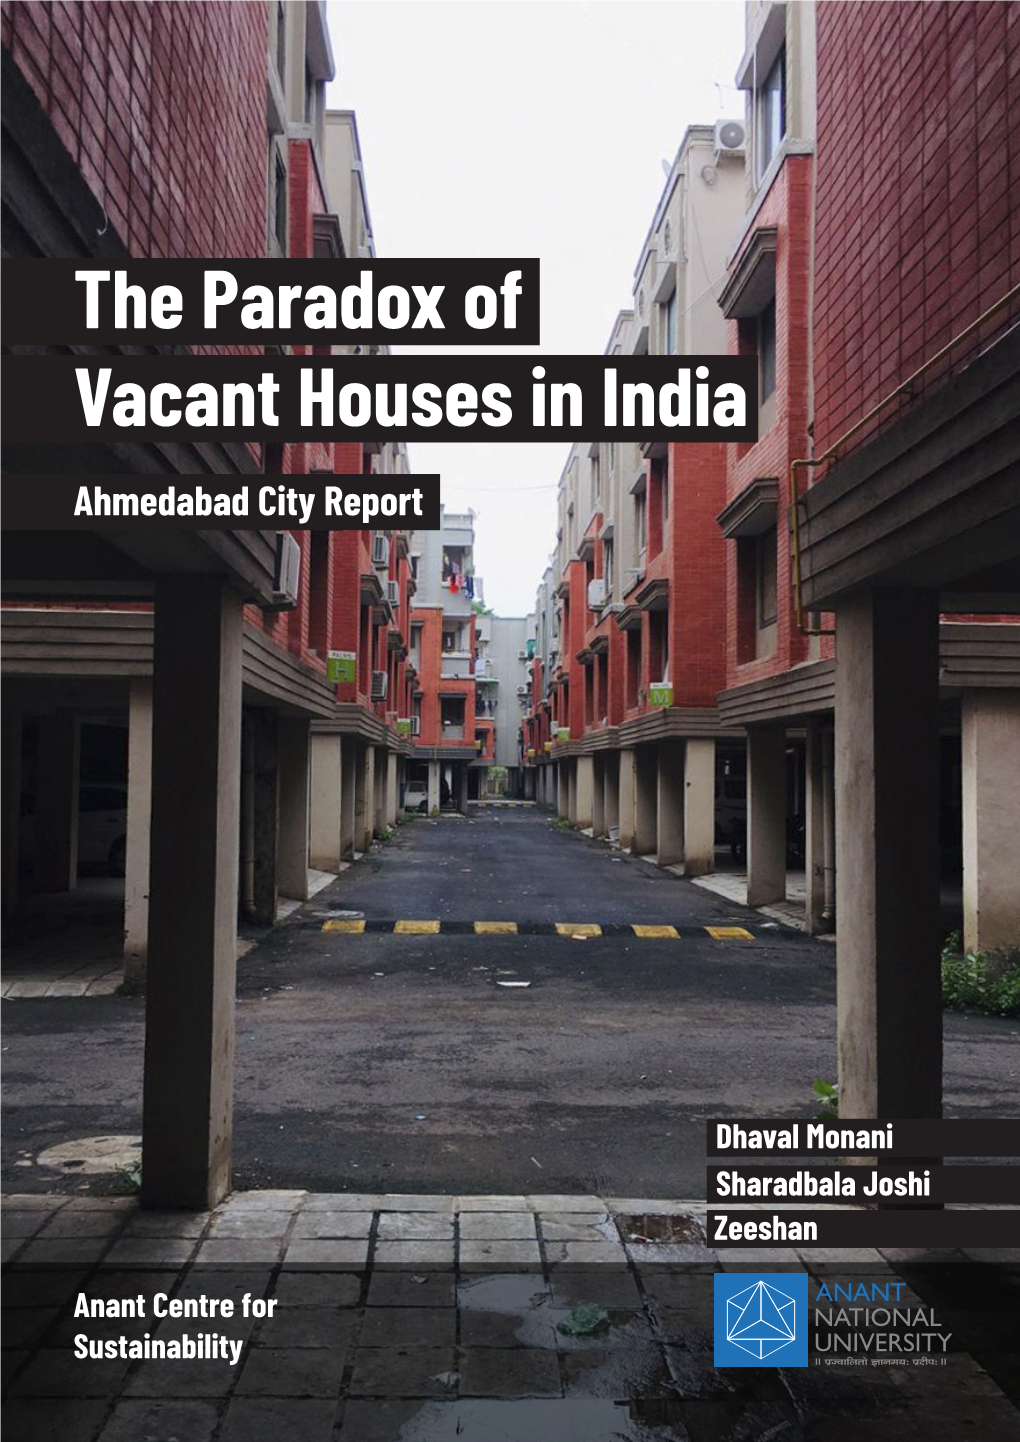 The Paradox of Vacant Houses in India Ahmedabad City Report